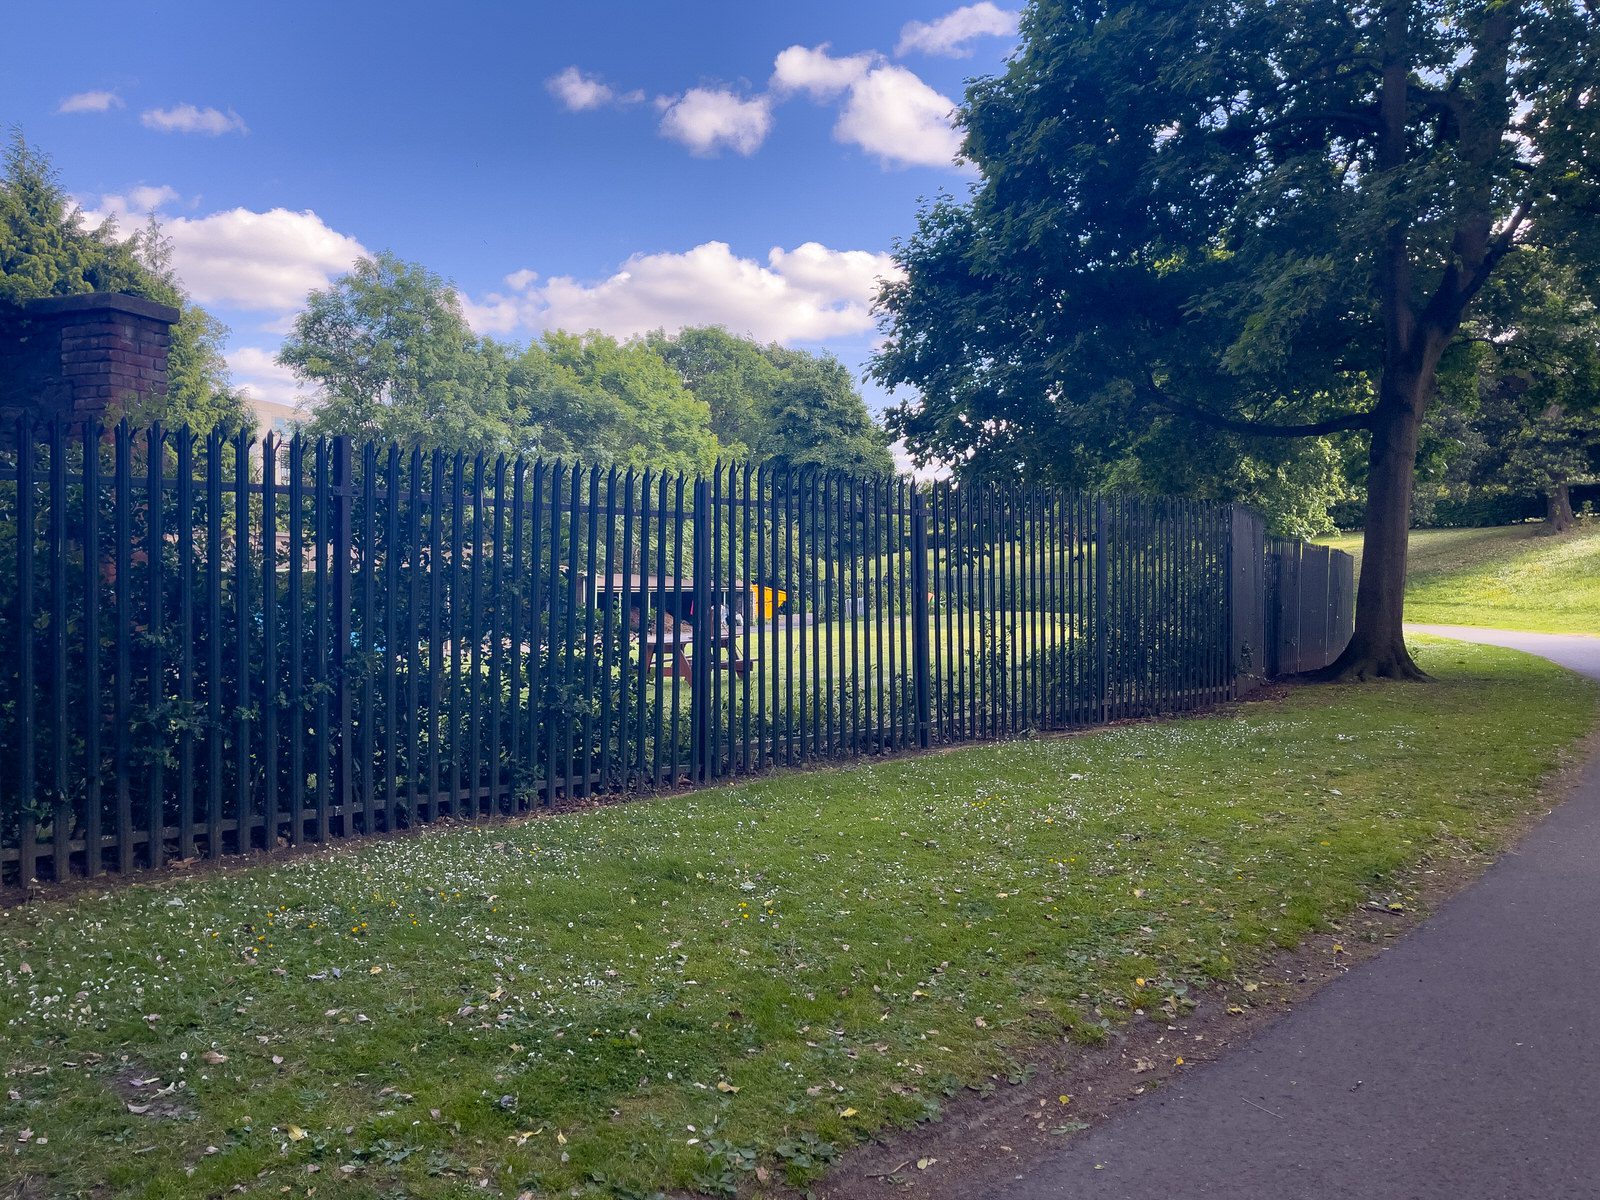 A QUICK VISIT TO PHOENIX PARK [THE IMMEDIATE AREA PARALLEL TO INFIRMARY ROAD WAS NEW TO ME]-234239-1